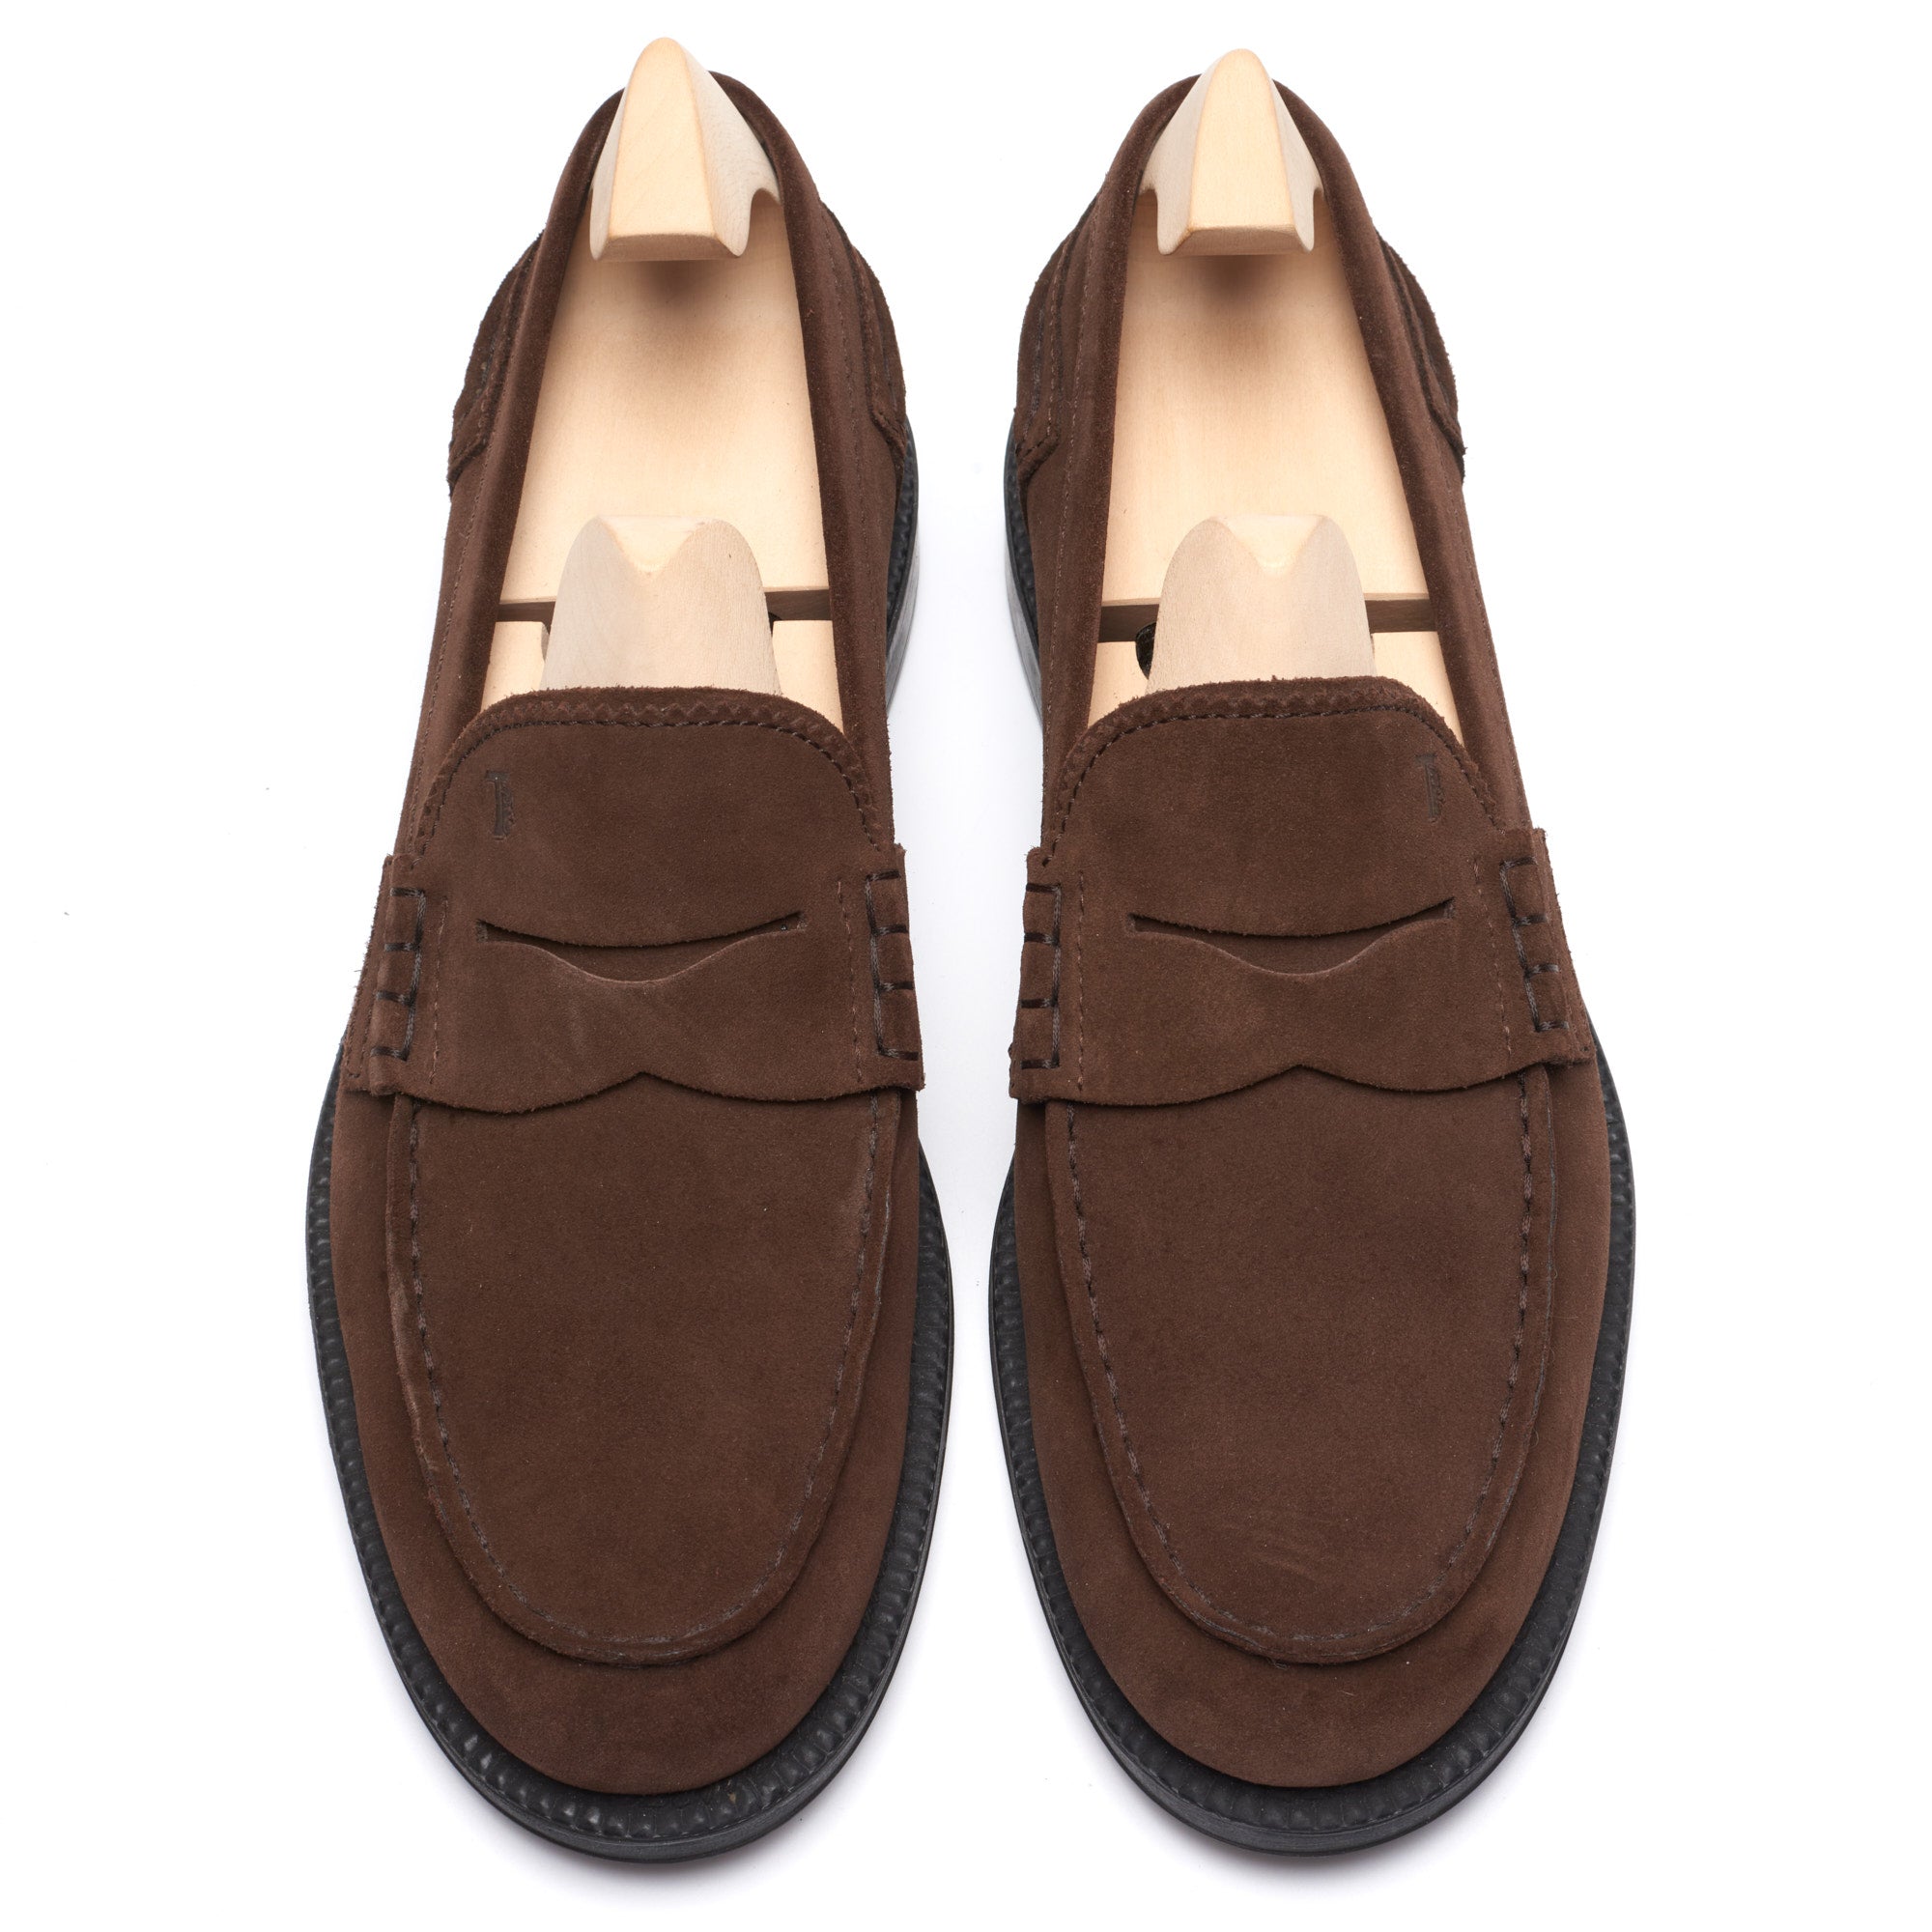 Men's Tod's loafers: leather and suede moccasin shoes